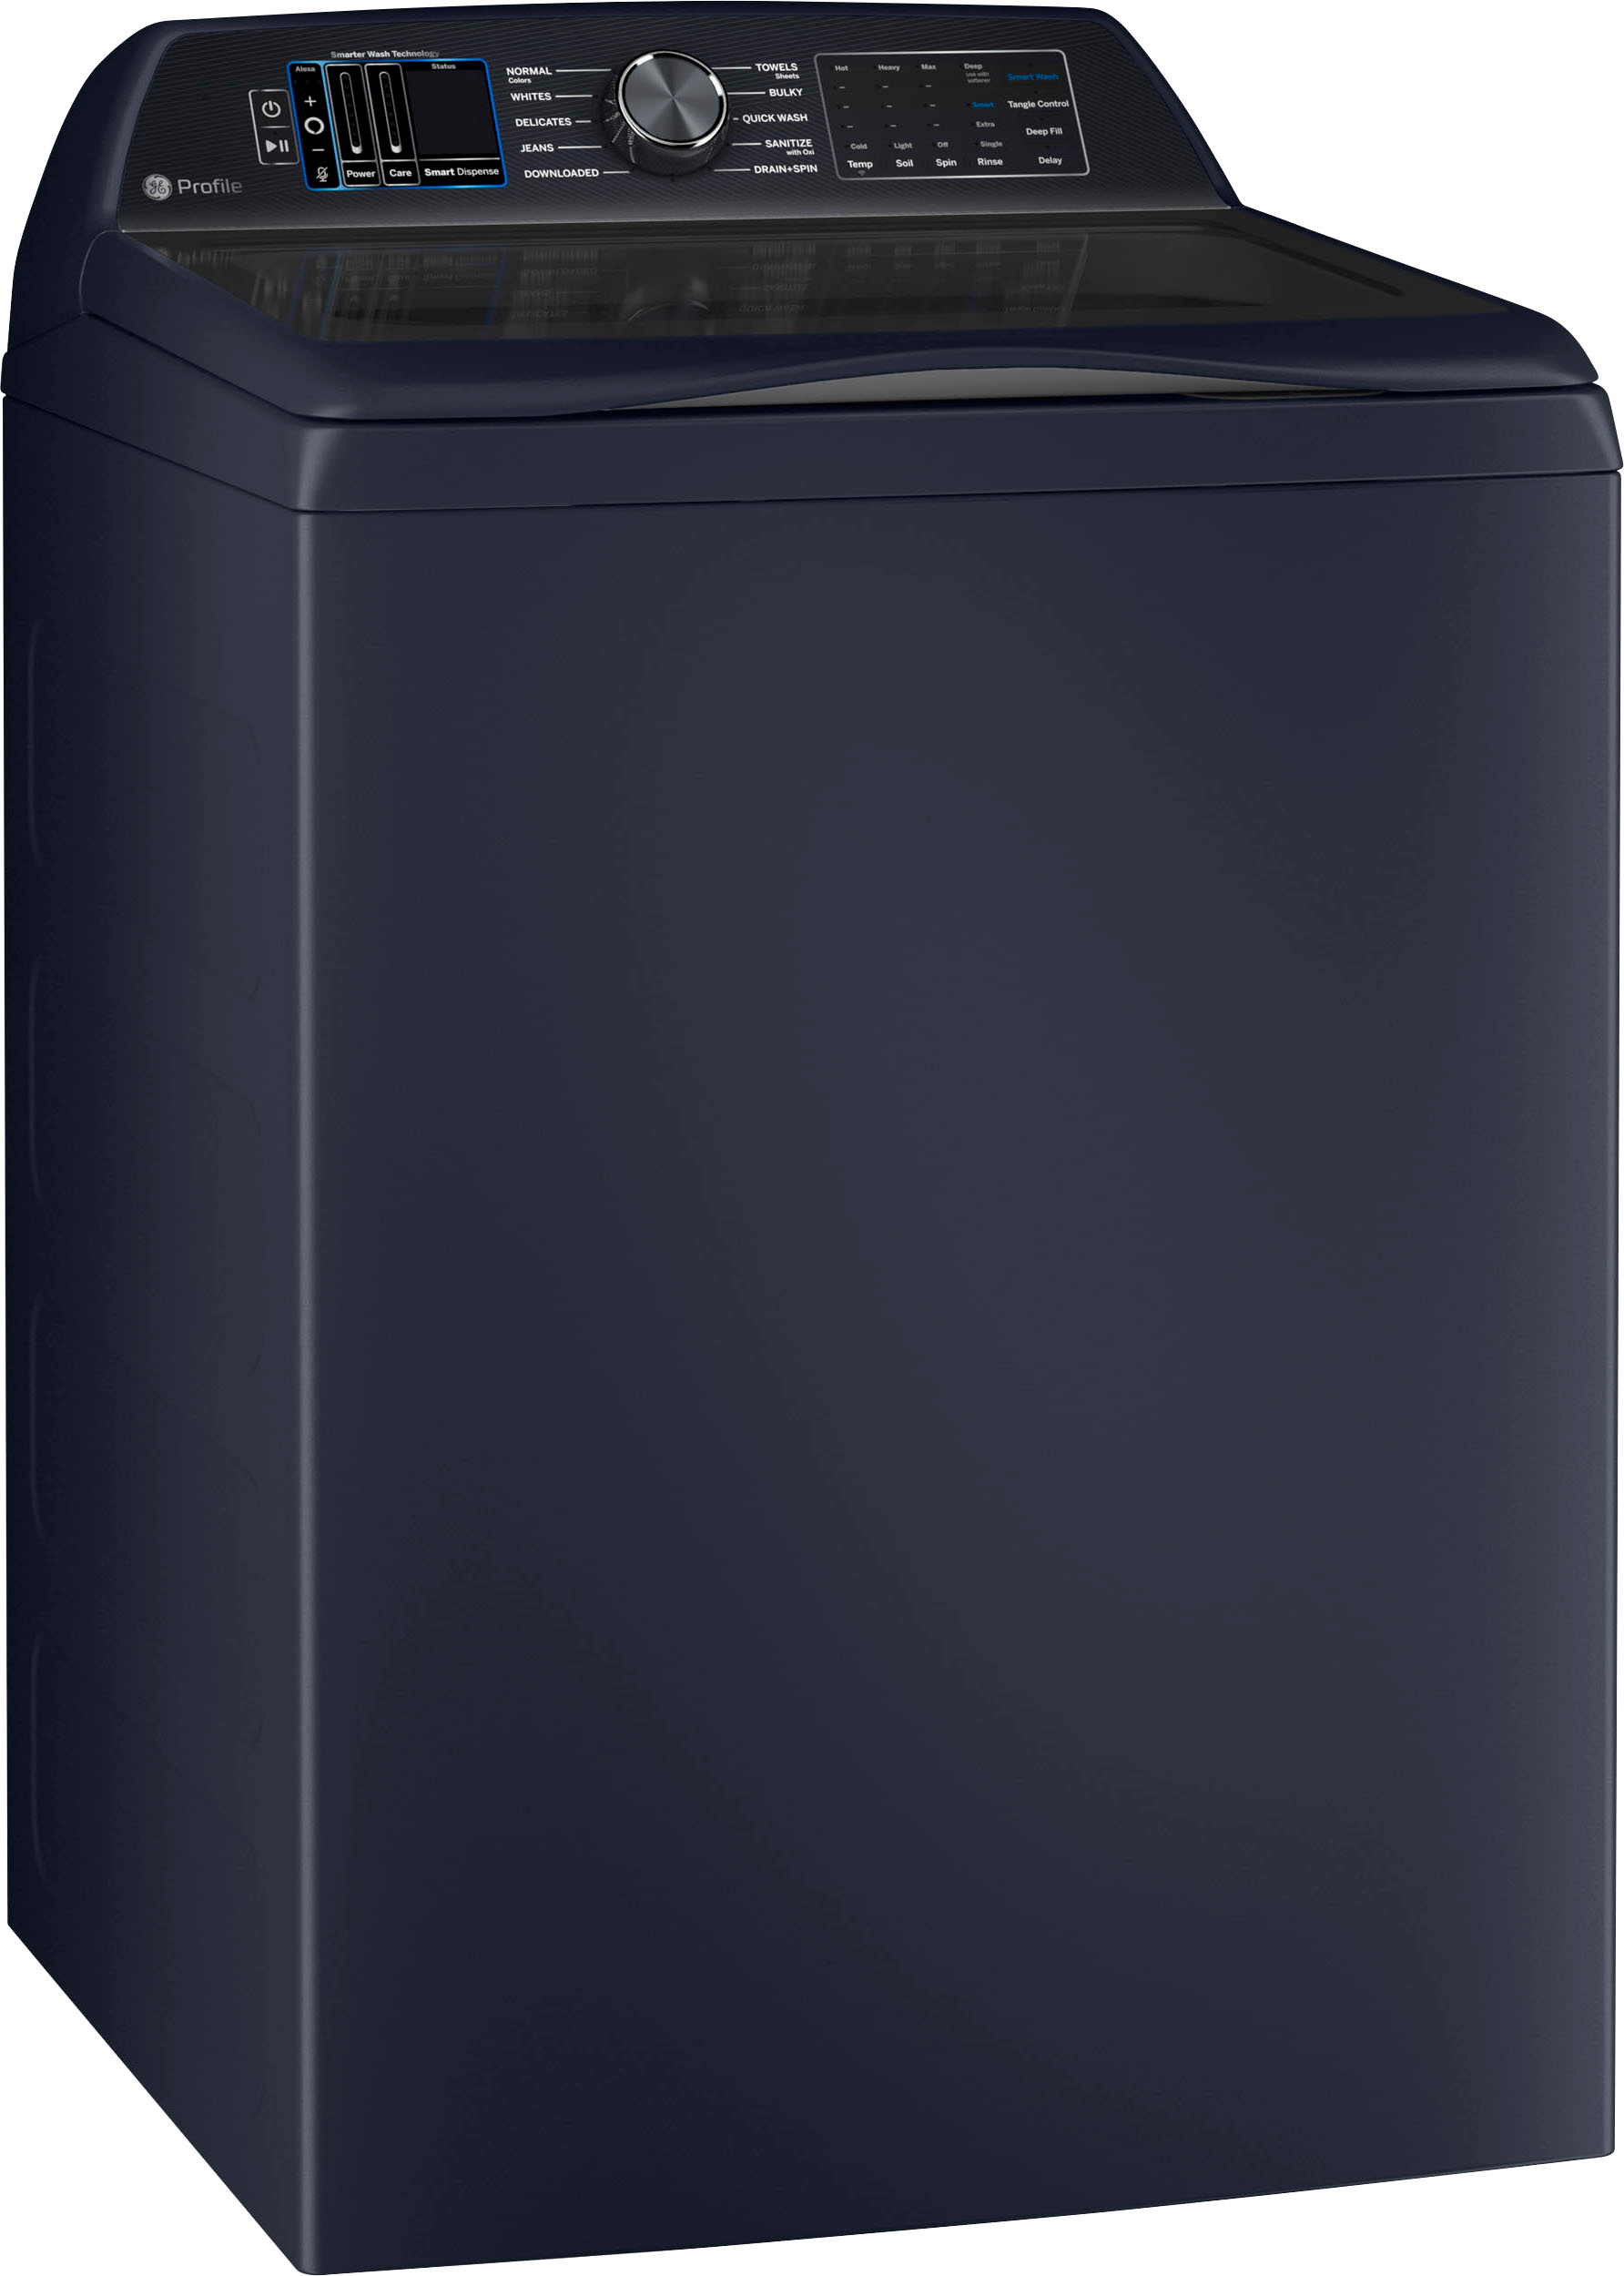 Angle View: Whirlpool - 5.2 Cu. Ft. High Efficiency Smart Top Load Washer with 2 in 1 Removable Agitator - Chrome shadow